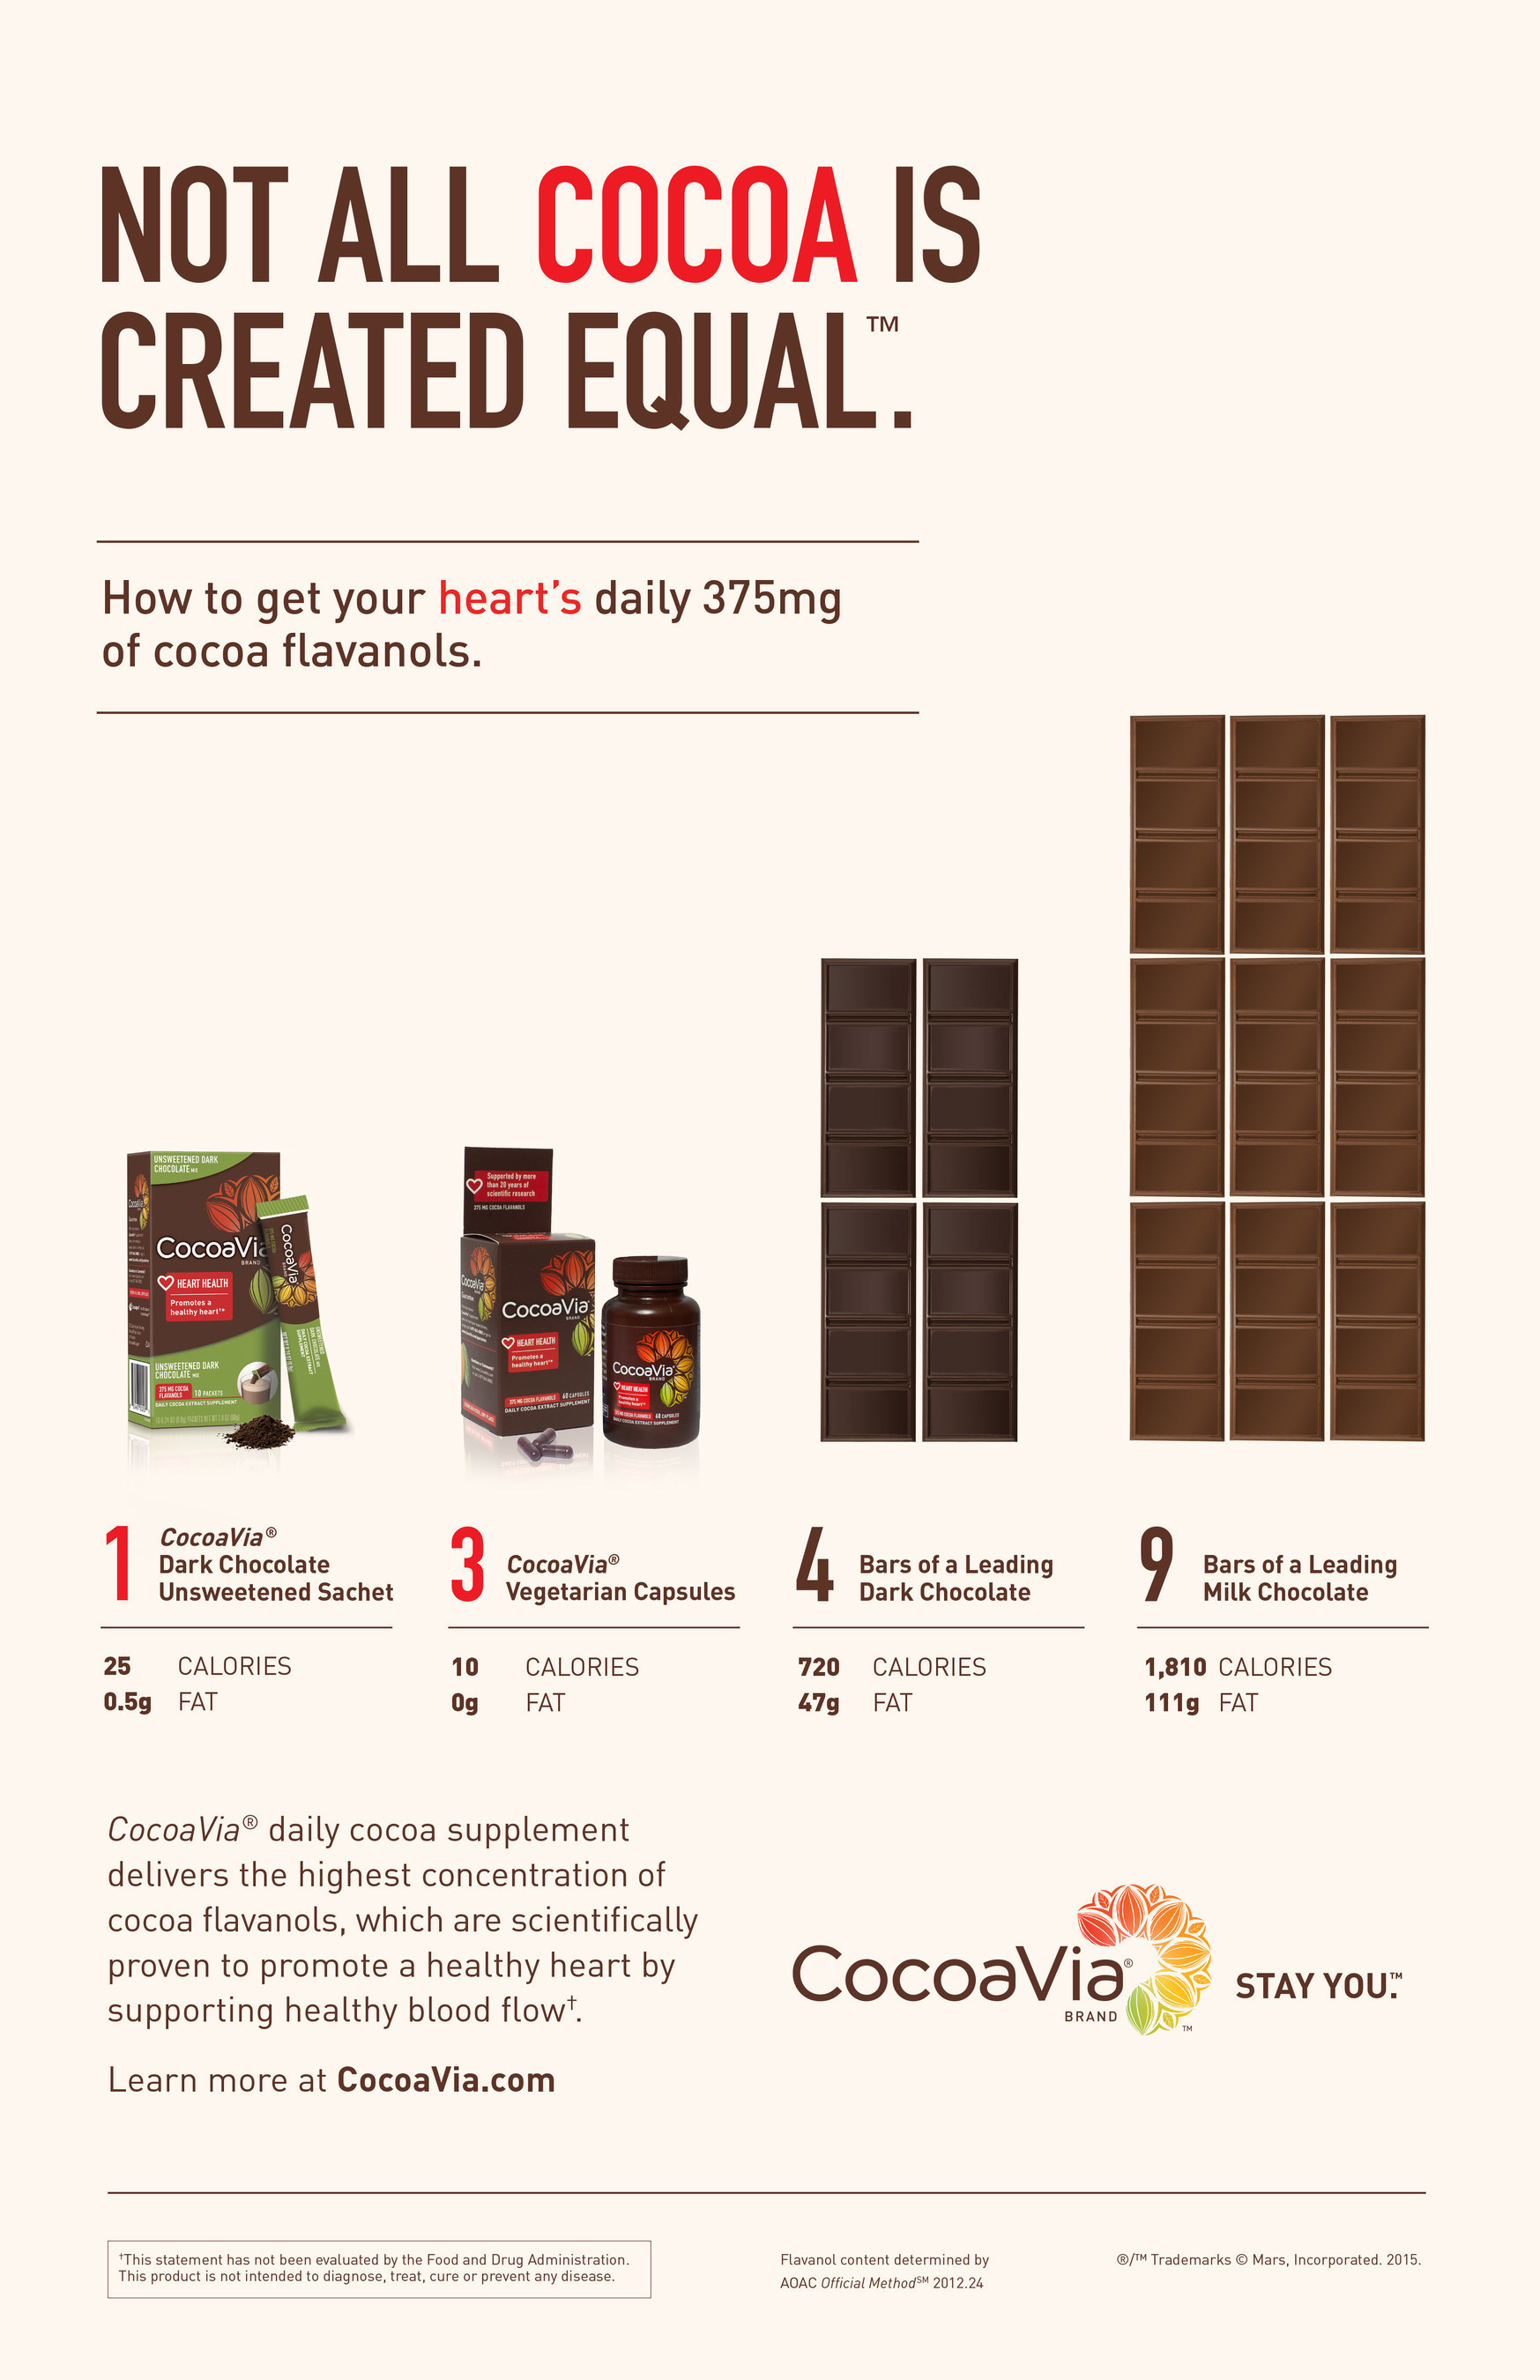 Not all cocoa is created equal.(TM) How to get your heart's daily 375mg of cocoa flavanols.